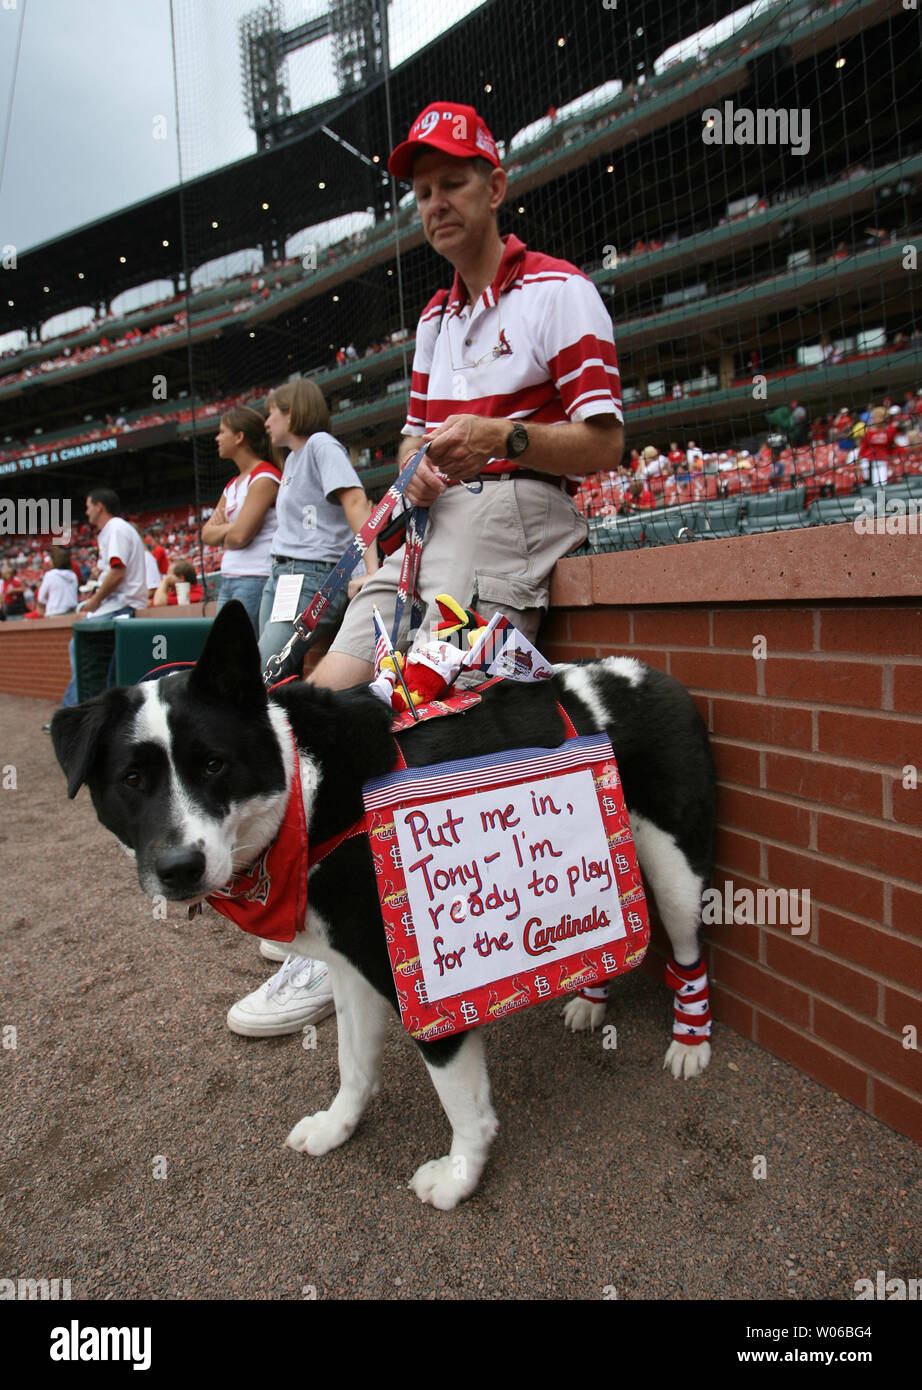 Liberty the dog has a message for St. Louis Cardinals manager Tony La Russa while he waits with his owner Tom Johnson of OFallon, Illinois during Pooches at the Park at Busch Stadium in St. Louis on June 10, 2007. Pooches at the Park allowed dog owners to bring their pet to the St. Louis Cardinals - Los Angeles Angels baseball game. . (UPI Photo/Bill Greenblatt) Stock Photo